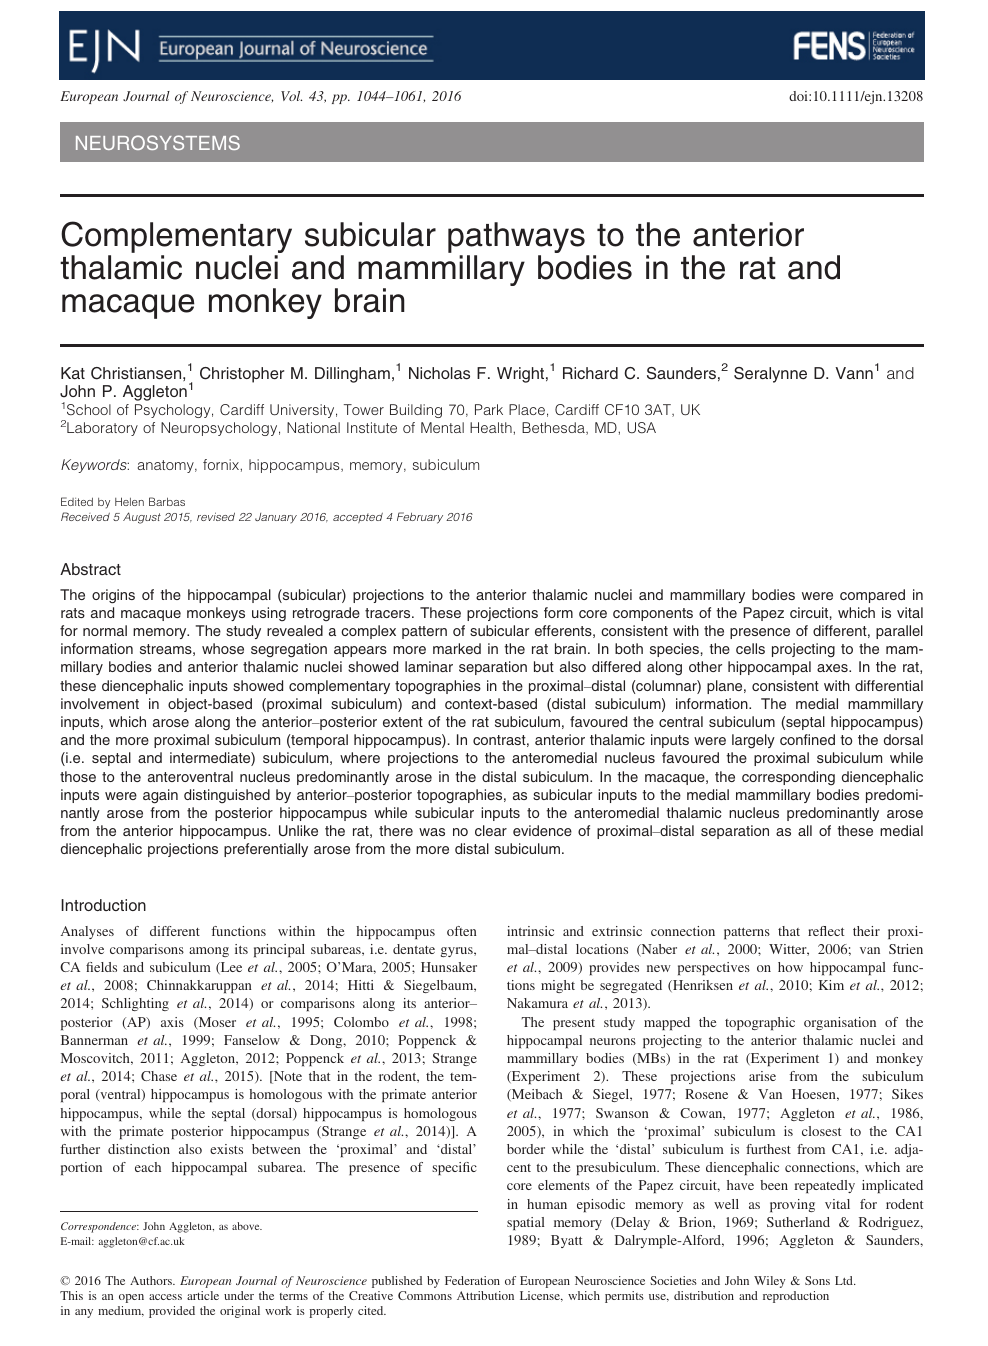 Complementary Subicular Pathways To The Anterior Thalamic Nuclei